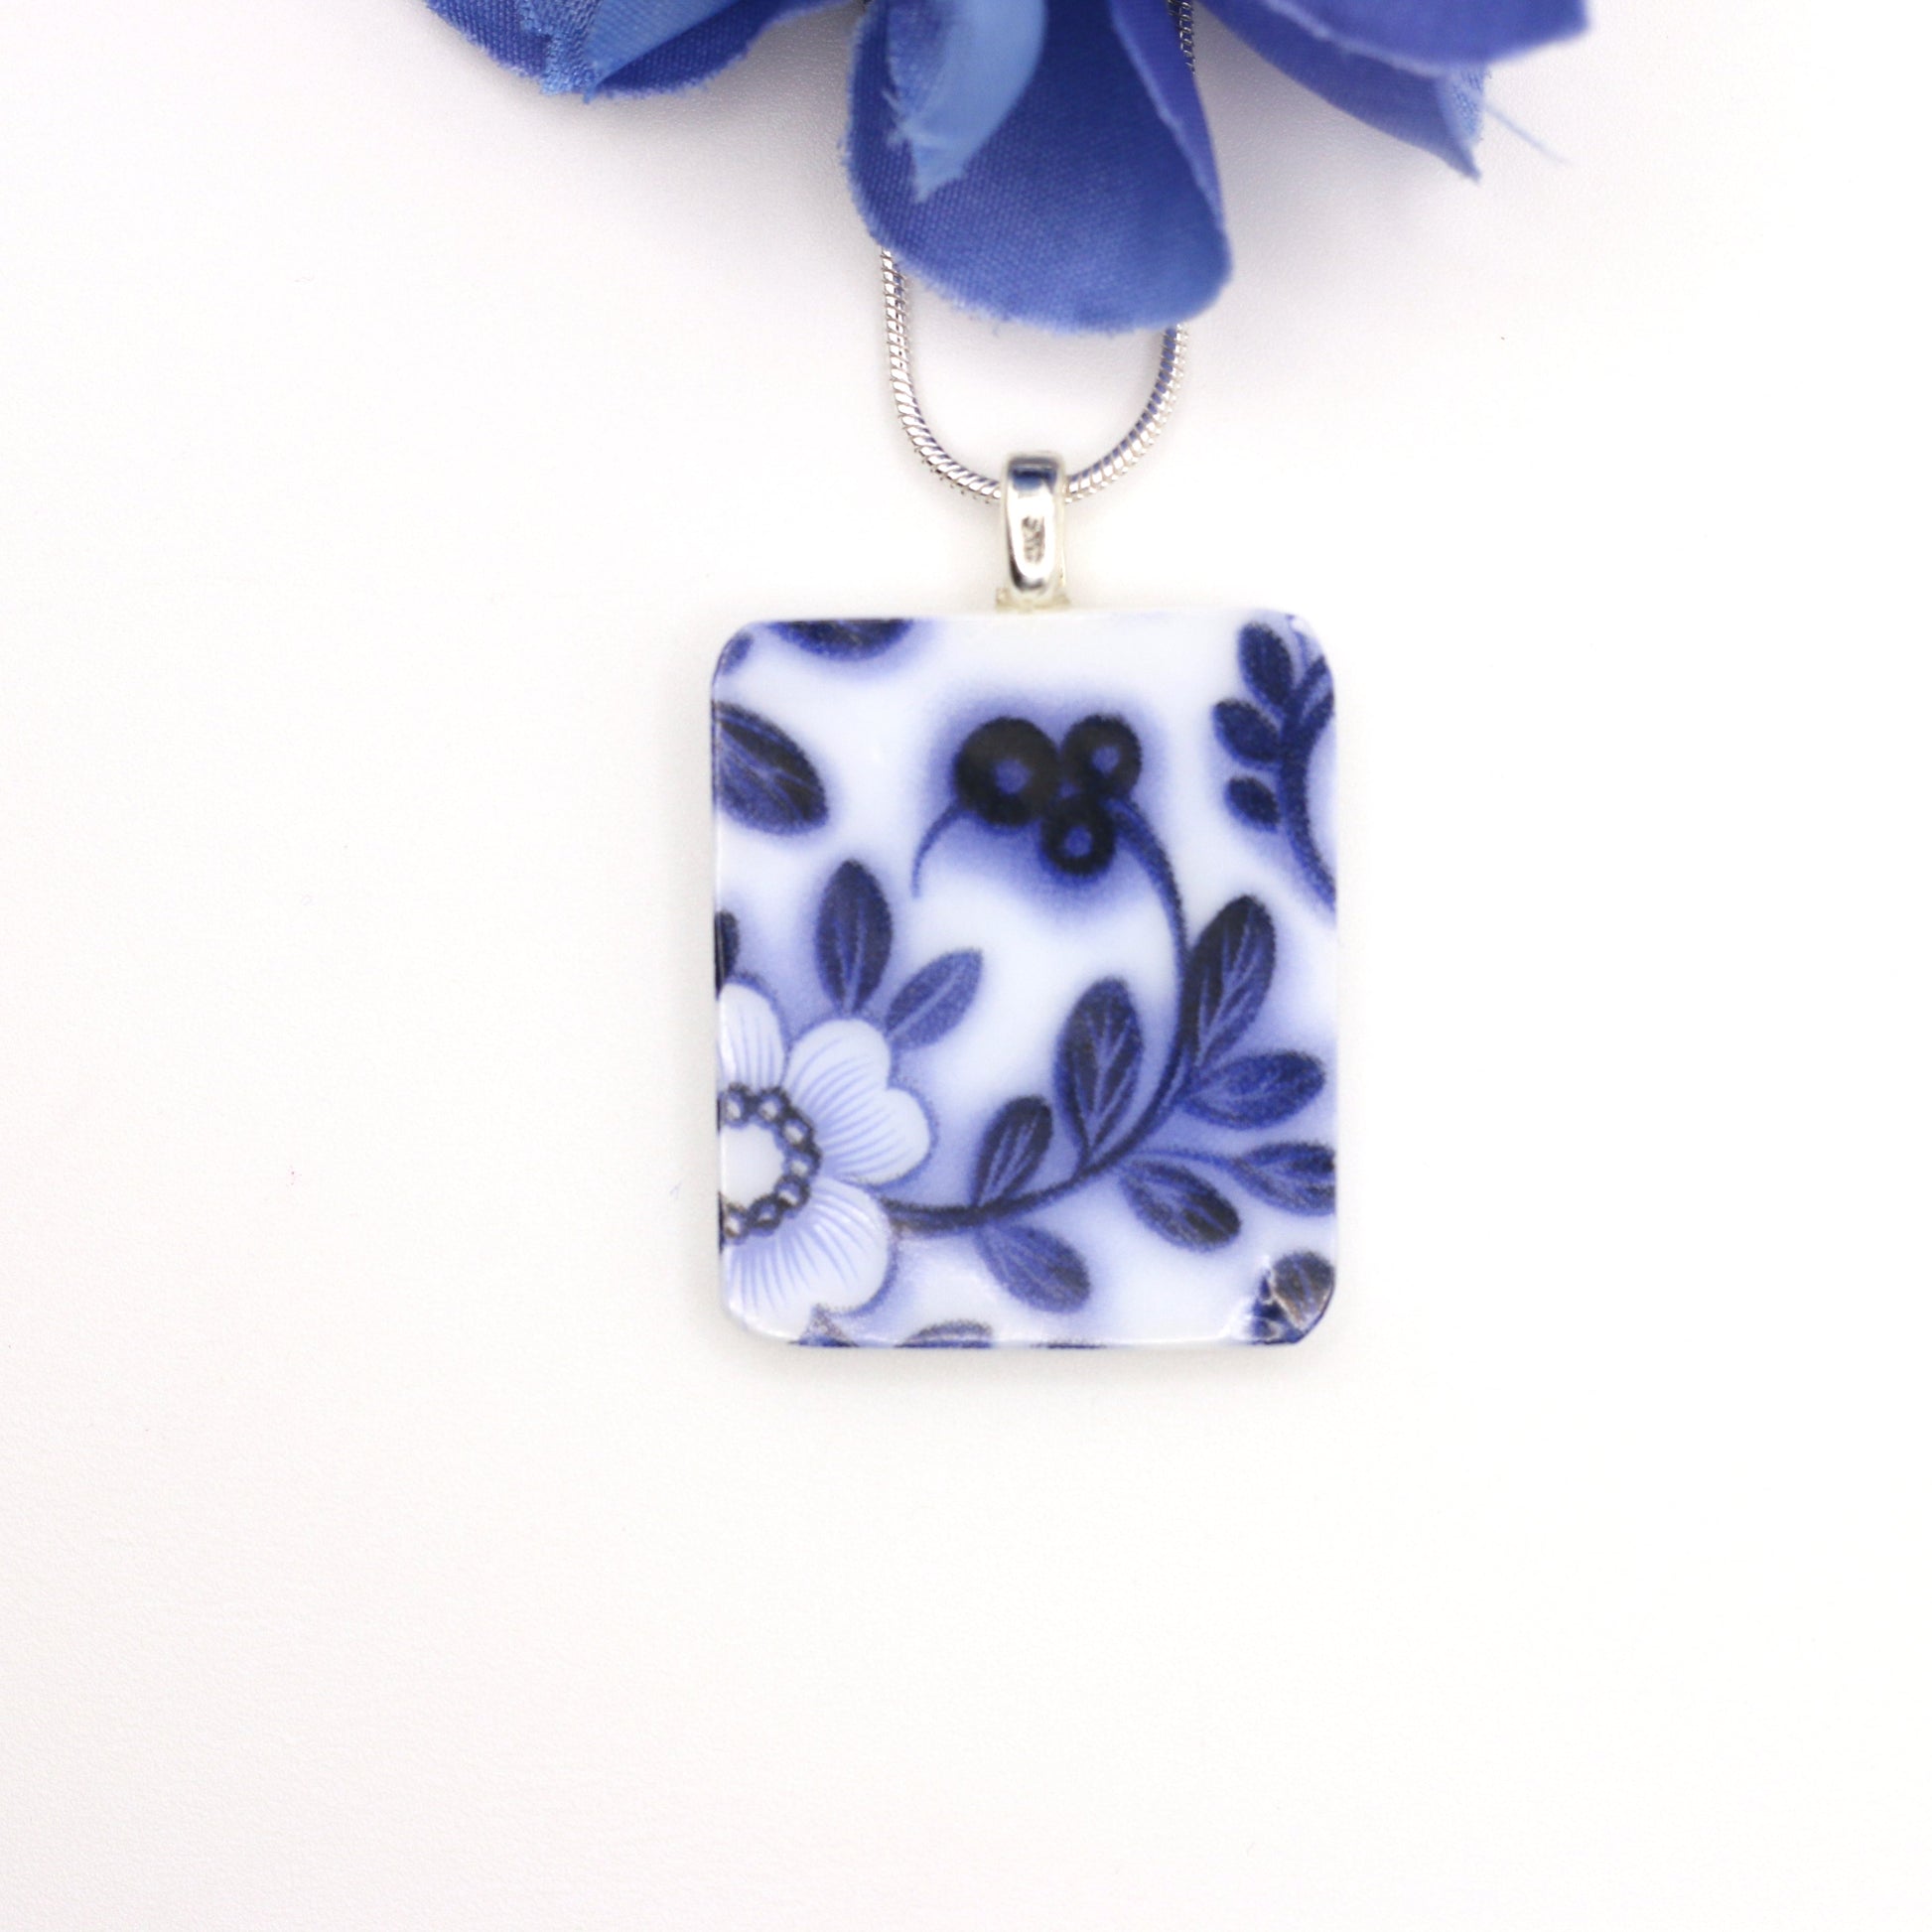 Delft Fused Glass Necklace - 3638